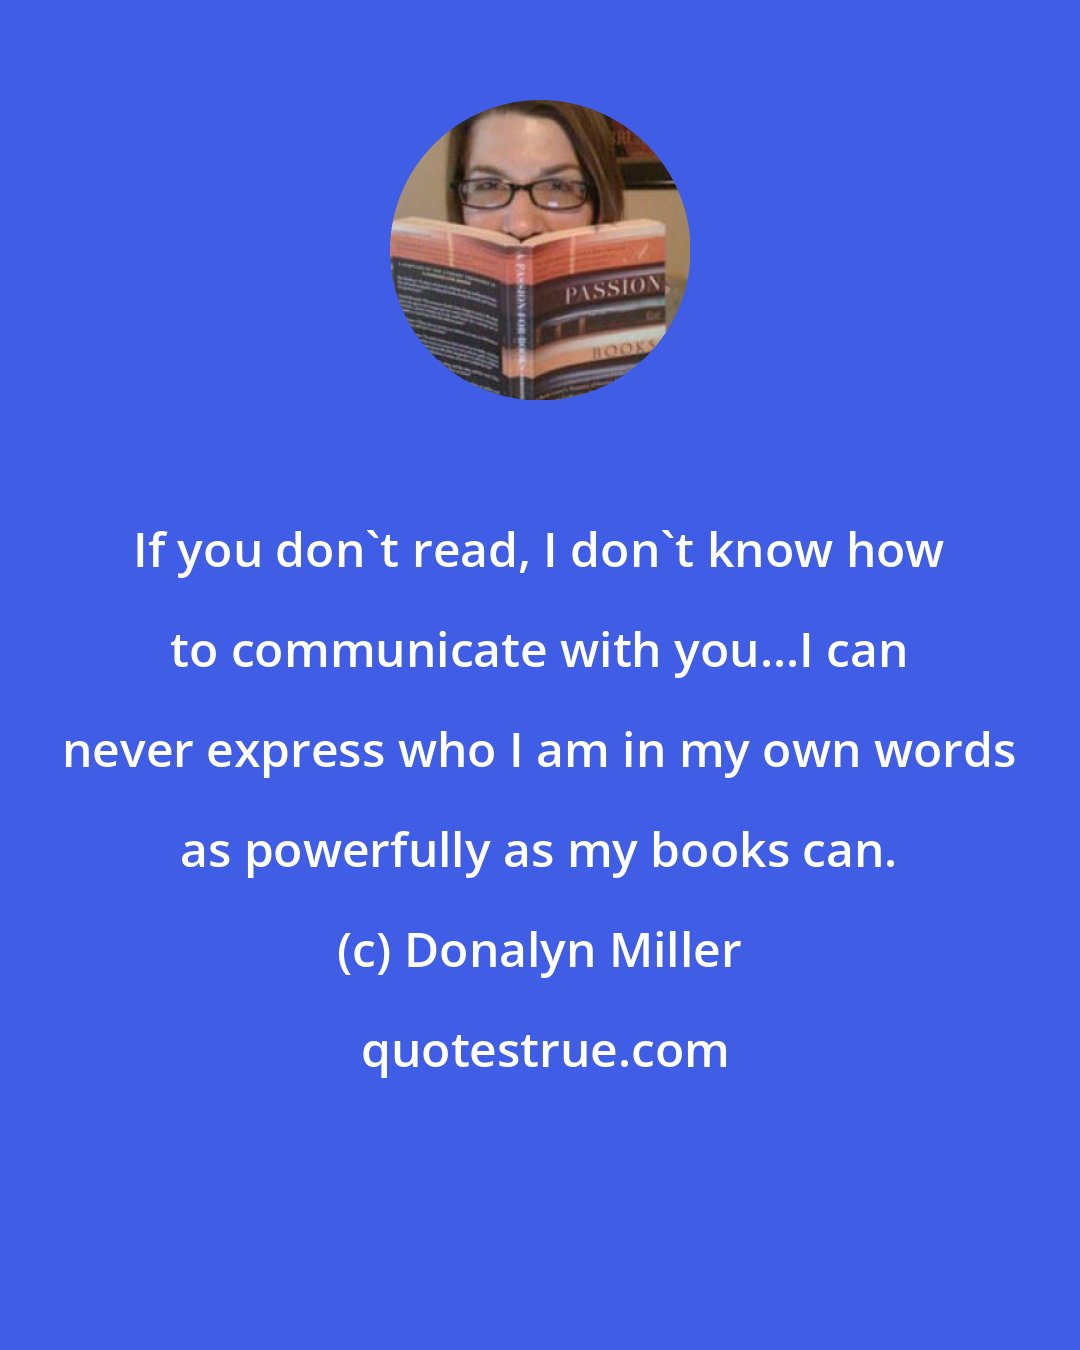 Donalyn Miller: If you don't read, I don't know how to communicate with you...I can never express who I am in my own words as powerfully as my books can.